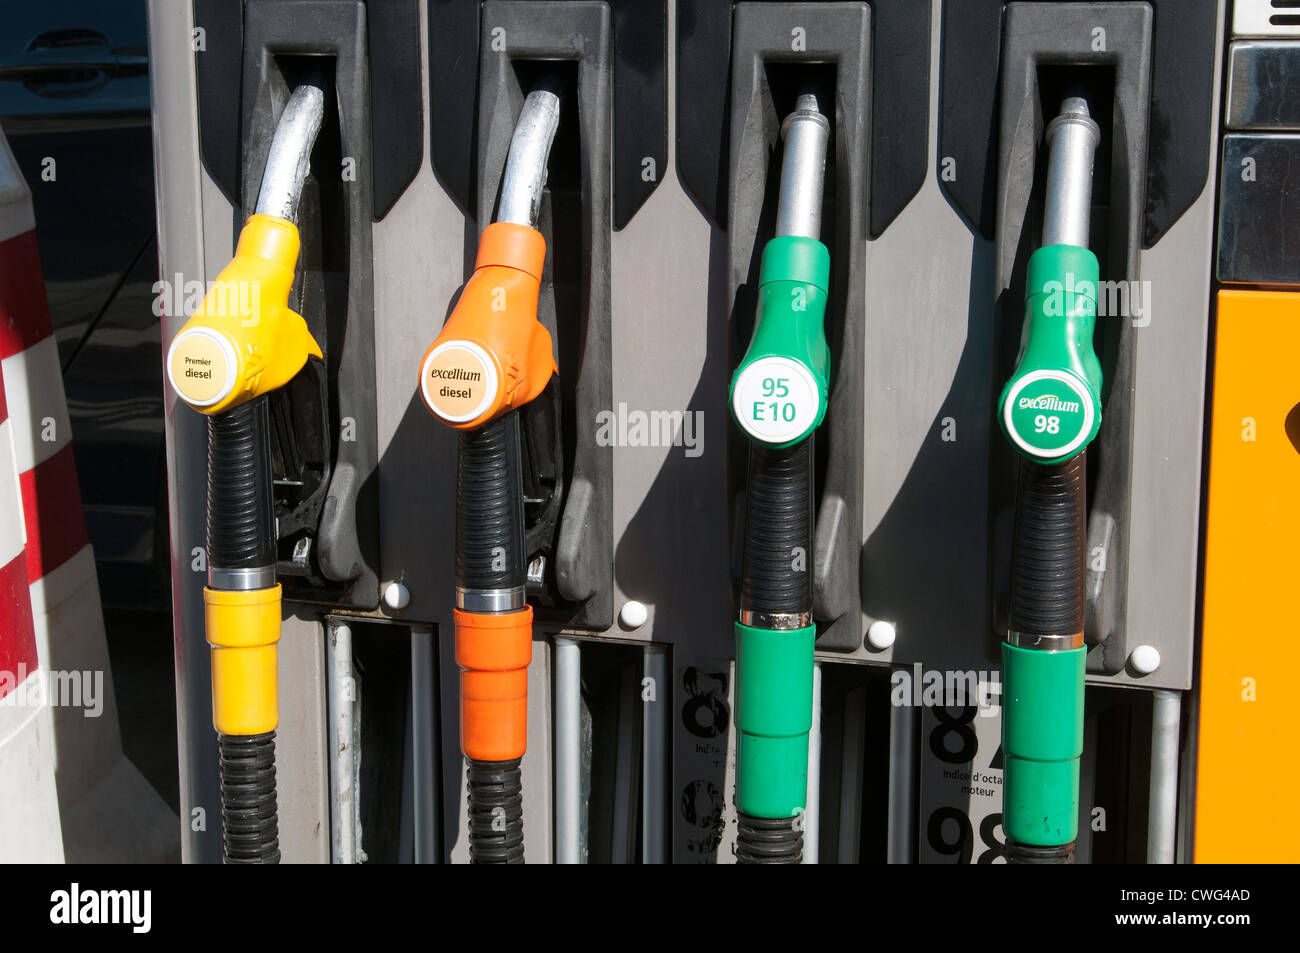 Selection of fuels at a filling station self service fuel pumps Stock Photo